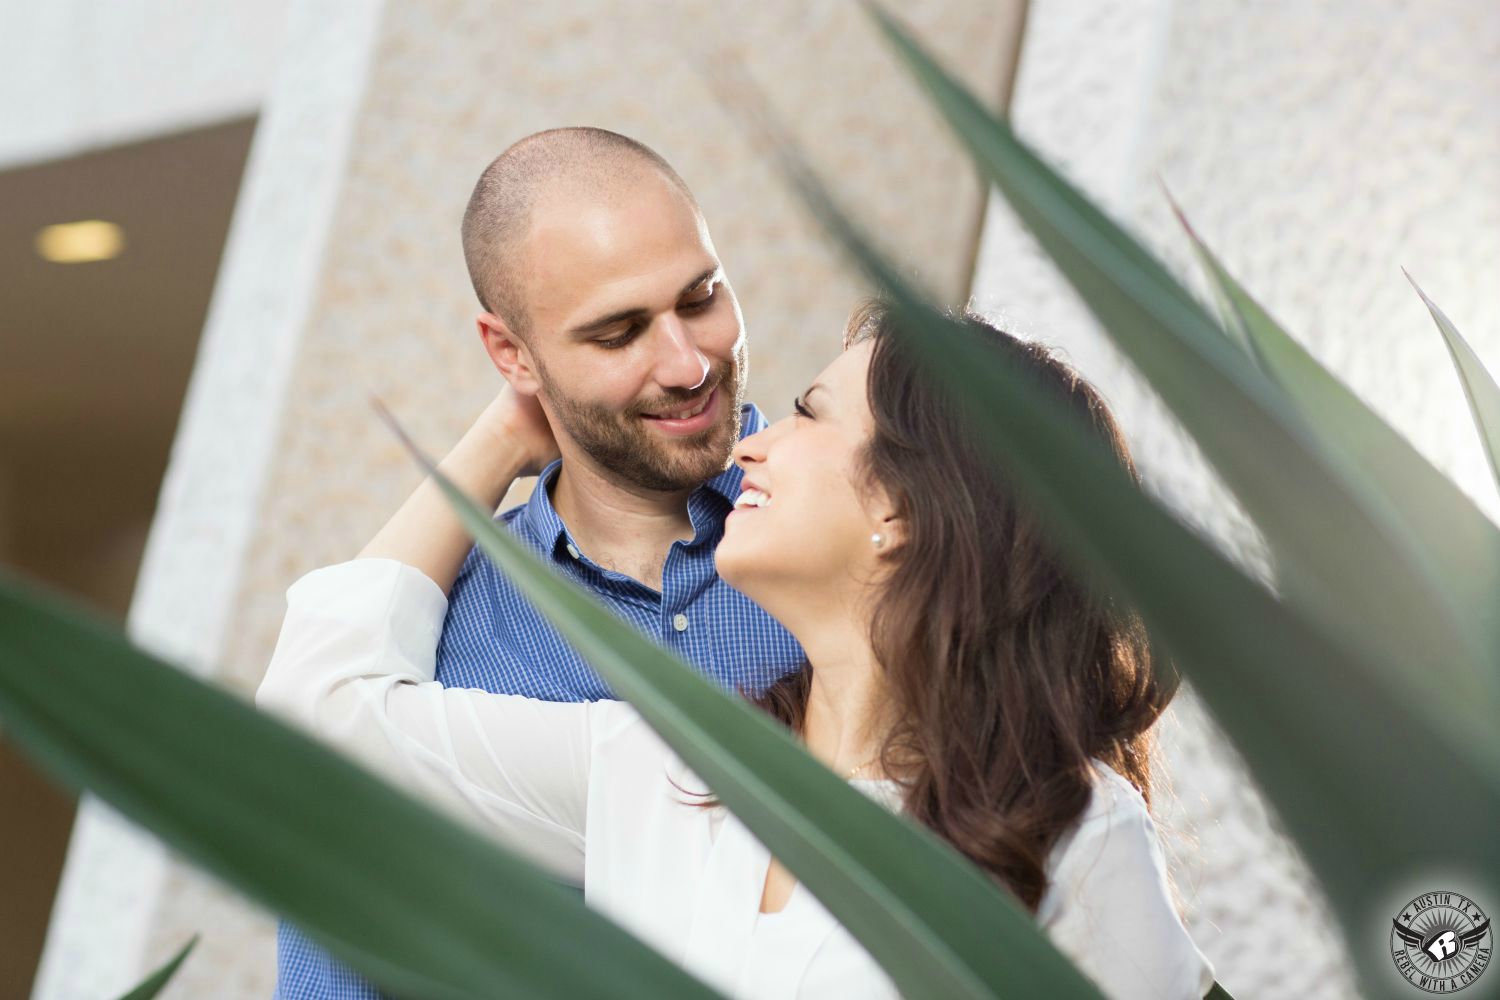 Wavy dark haired Latino girl in a white blouse looks up smiling at a guy with a short beard wearing a blue and white checked shirt with a succulent agave plant in the foreground obscuring the couple behind spiky leaves at the Mexican American Cultural Center in this elated engagement image in Austin, Texas.